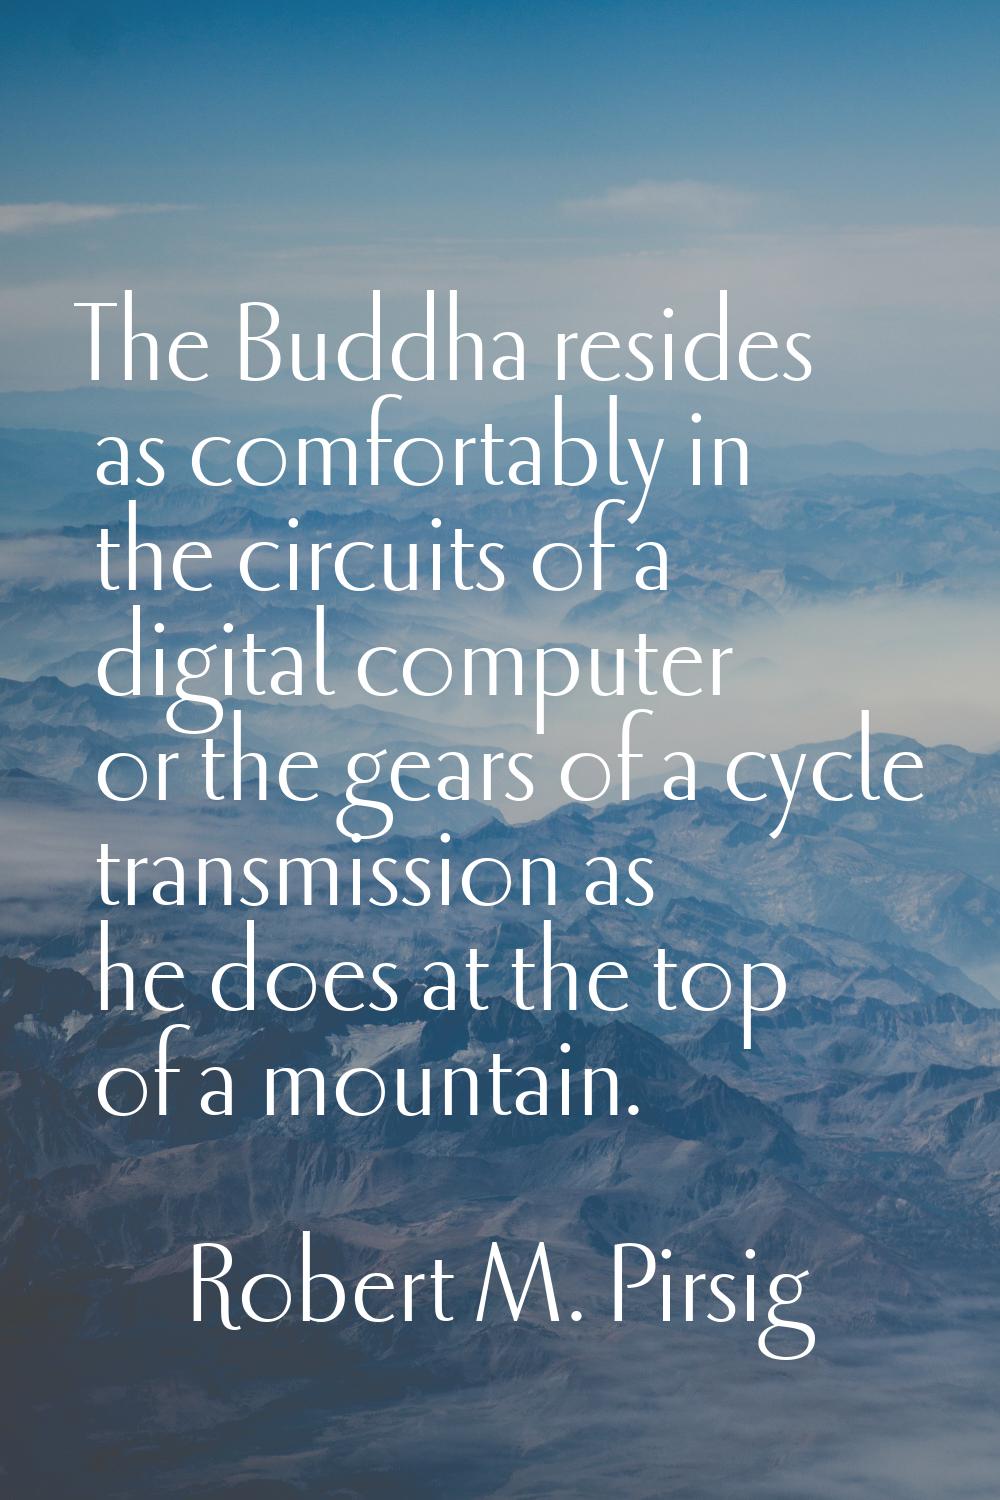 The Buddha resides as comfortably in the circuits of a digital computer or the gears of a cycle tra